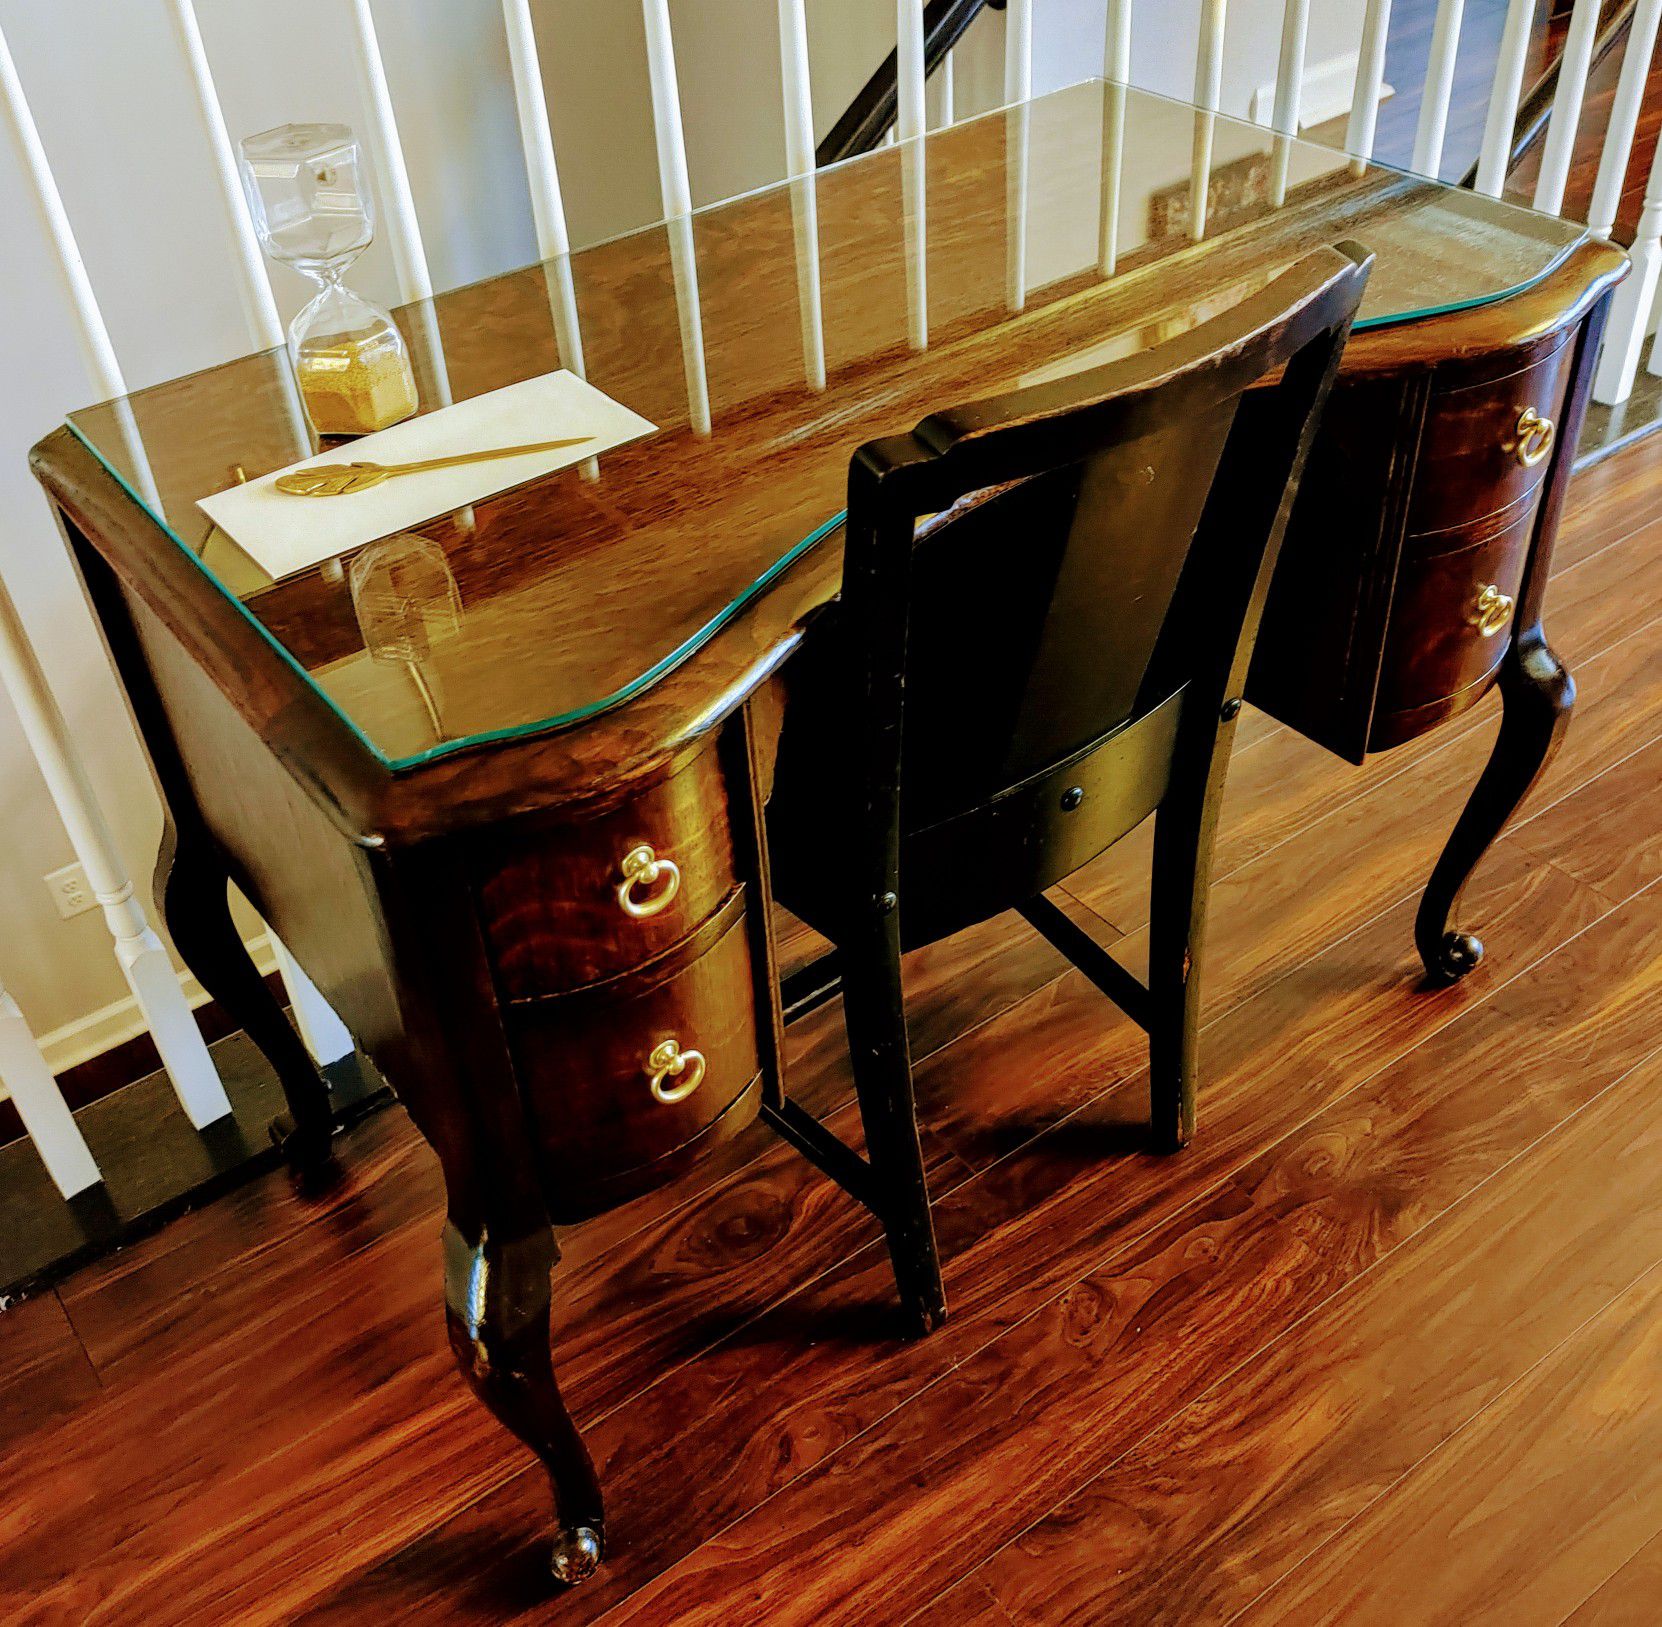 Antique Desk with Solid Brass Pulls.